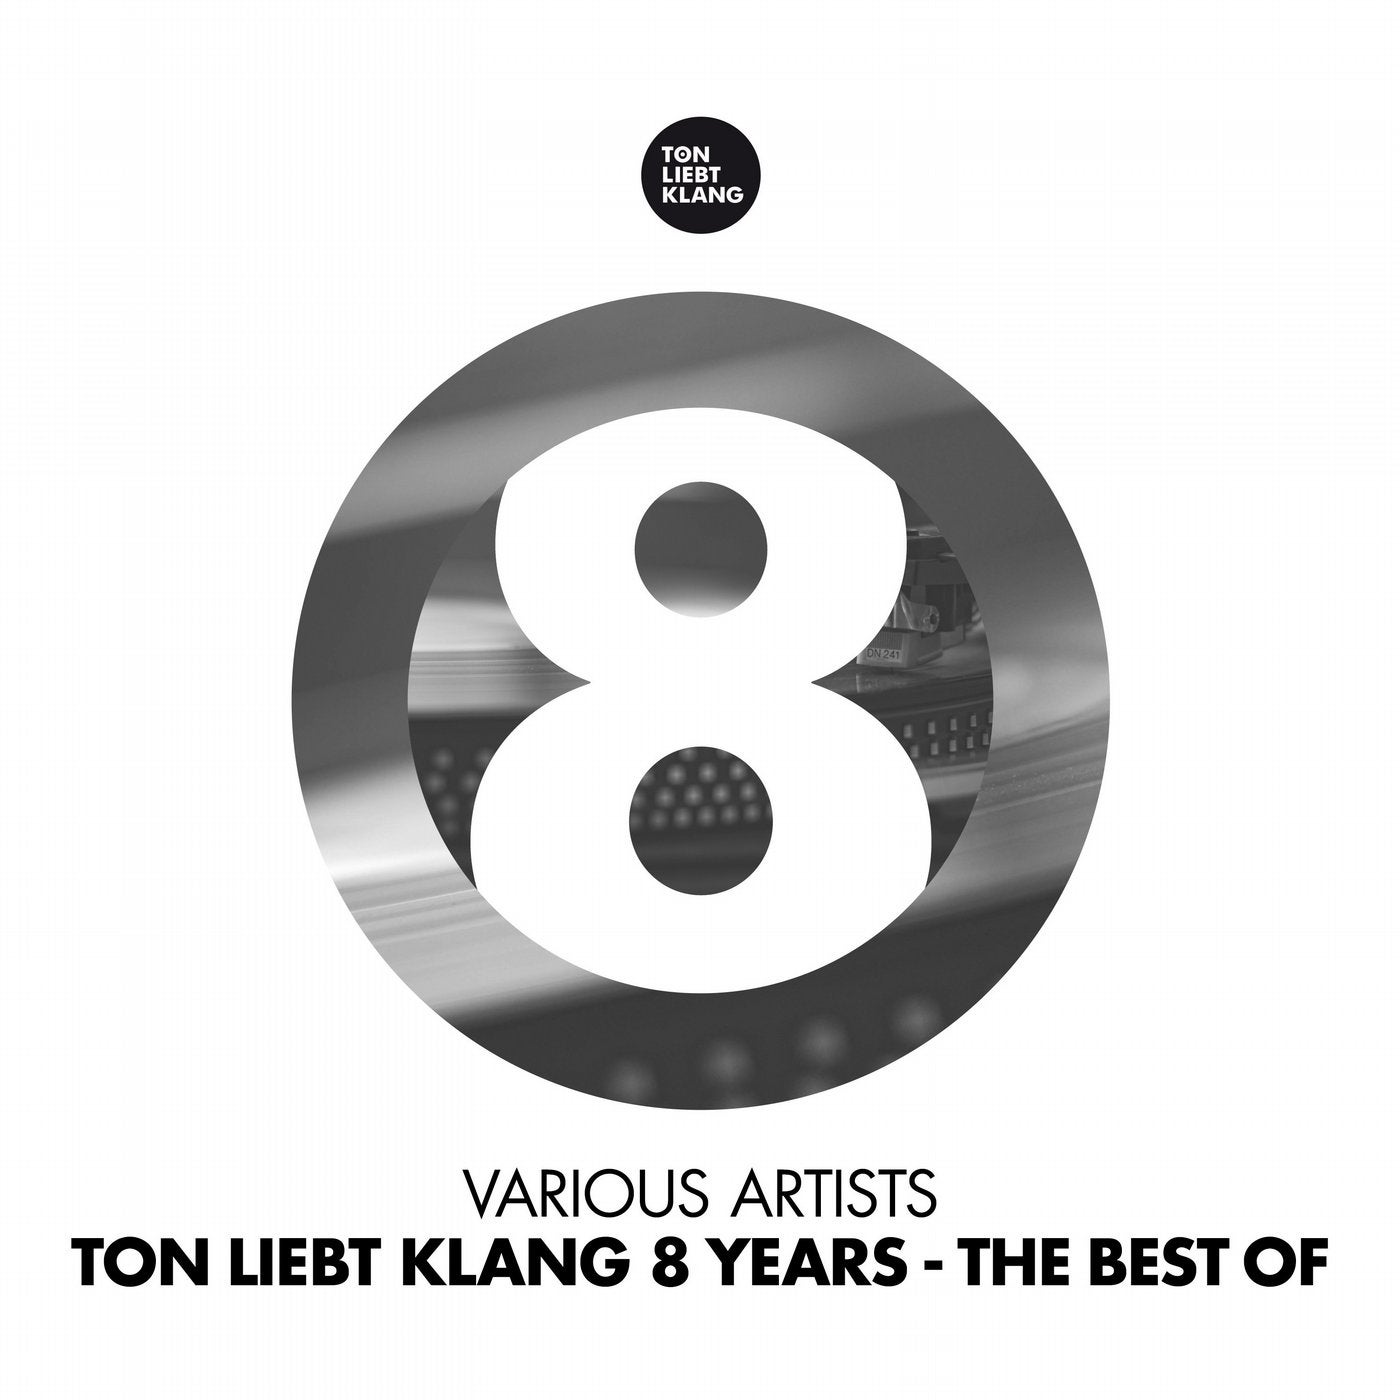 Ton Liebt Klang 8 Years (The Best of)